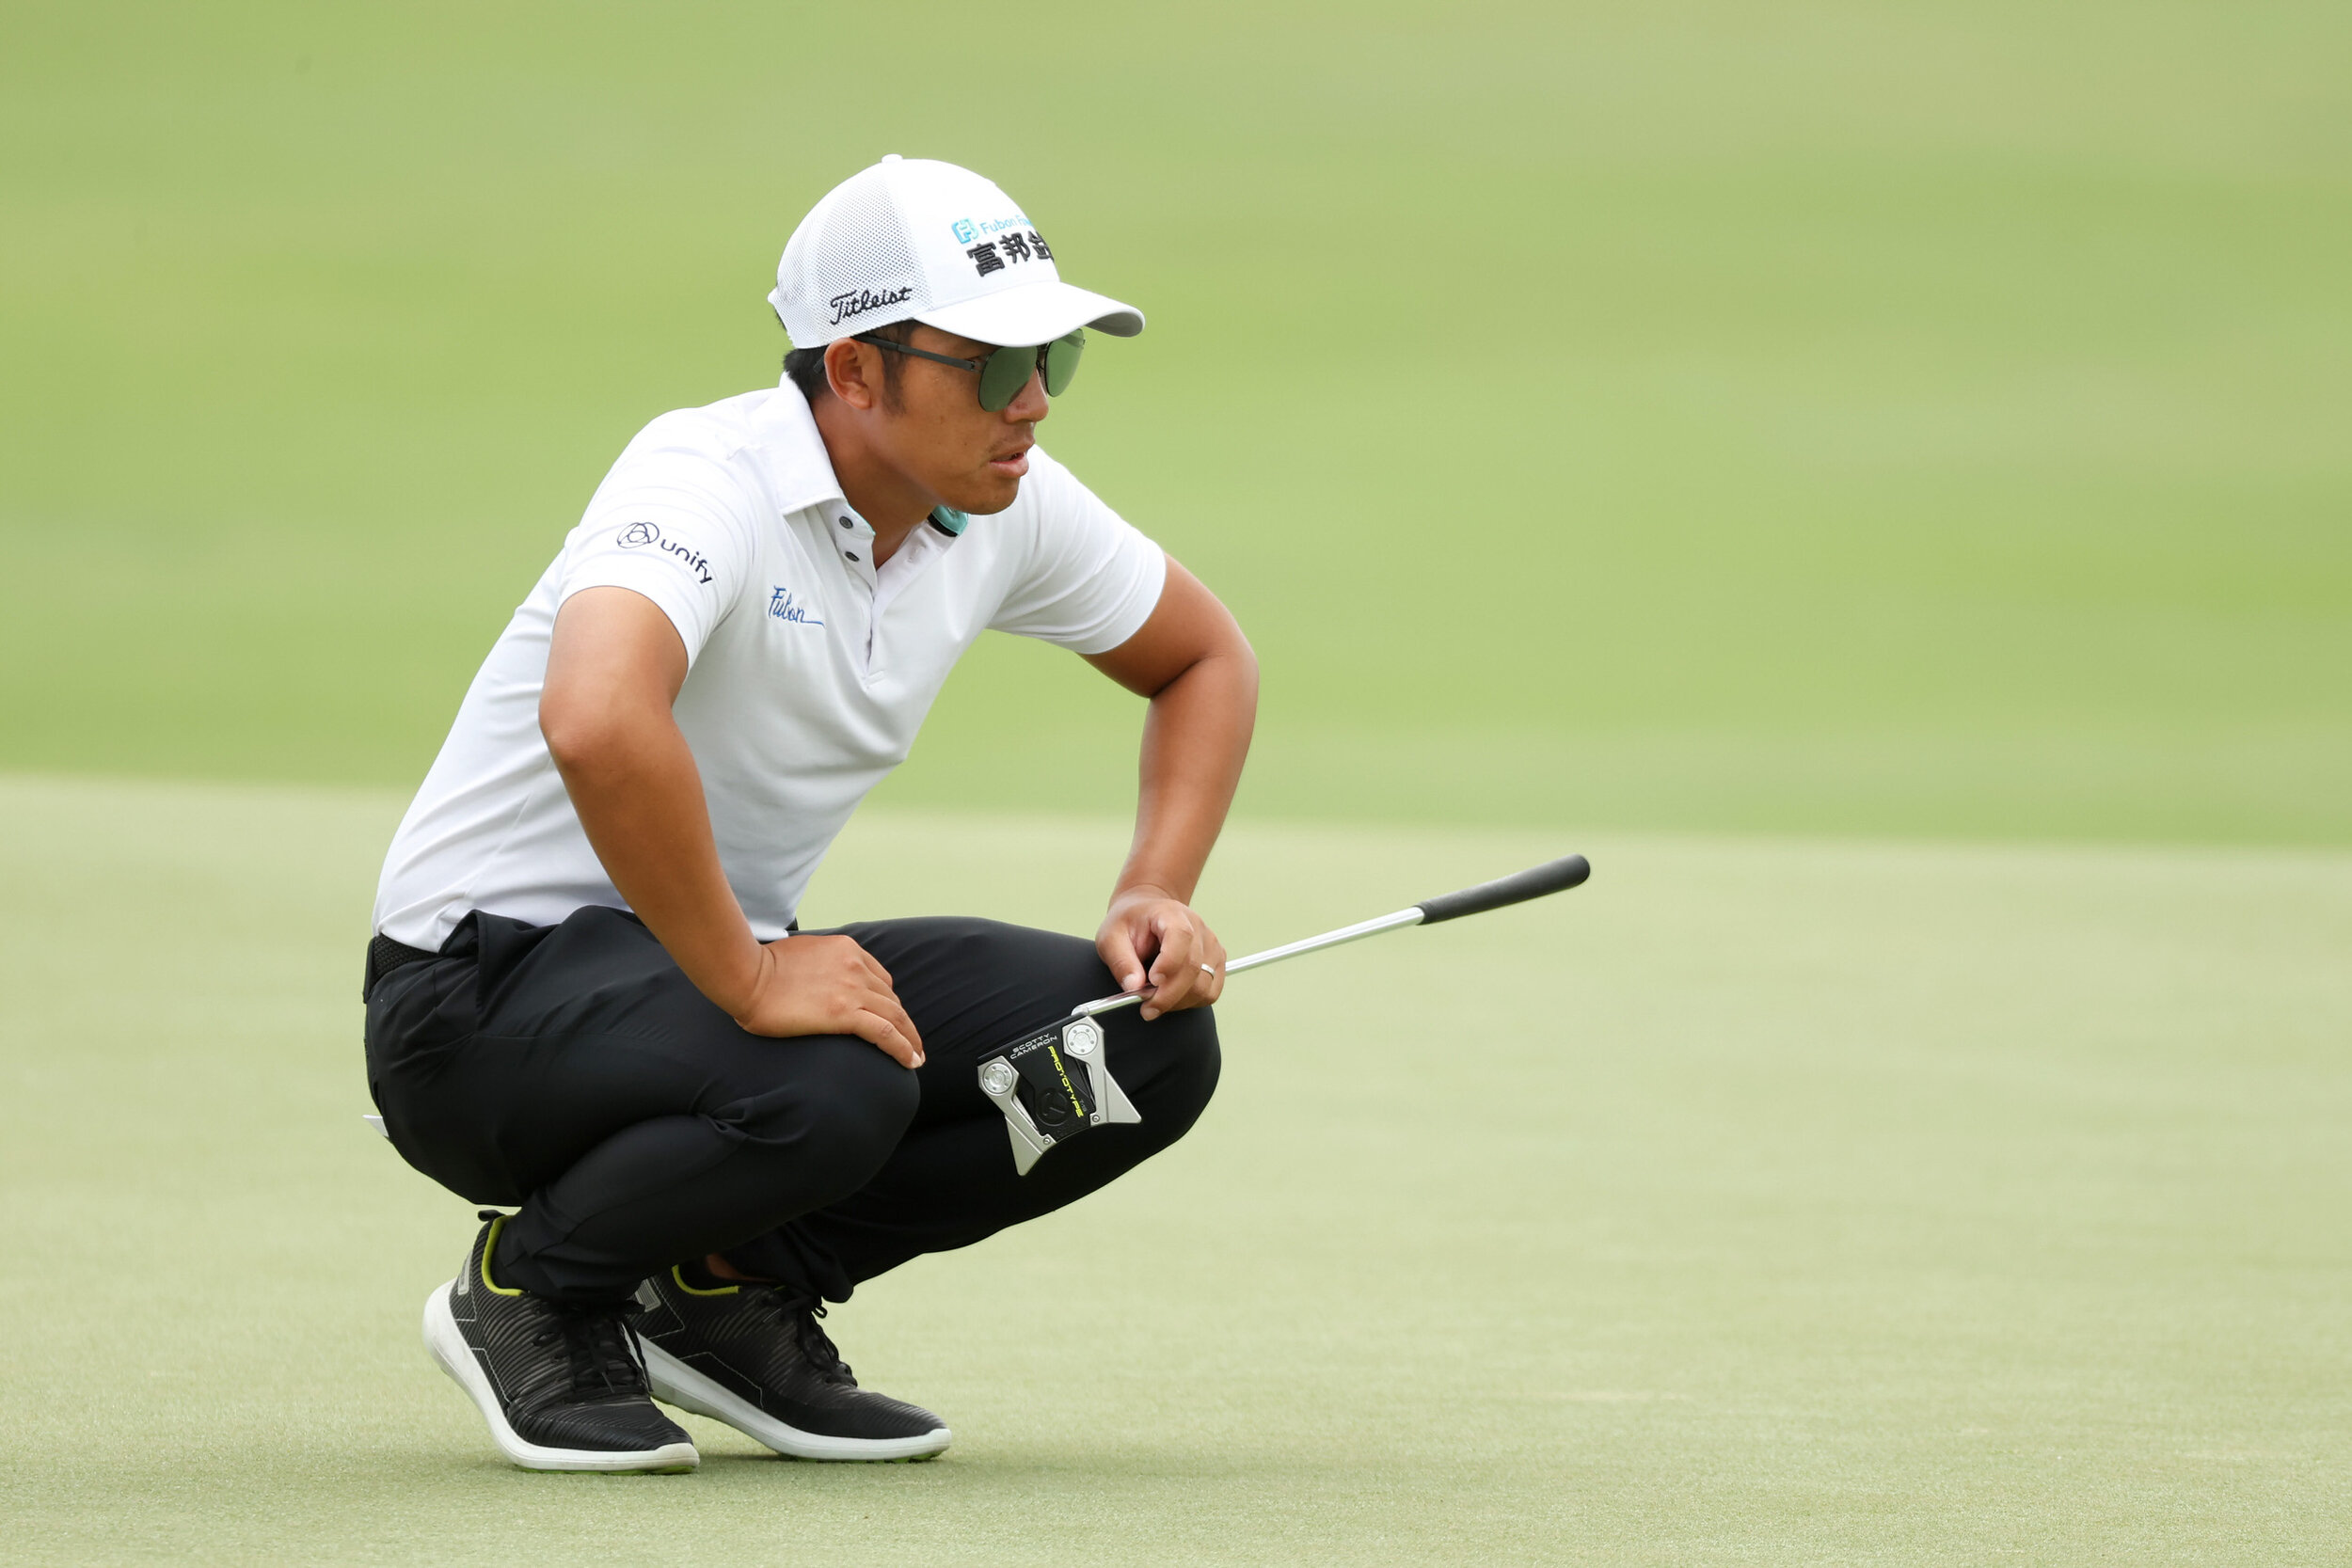  PALM BEACH GARDENS, FLORIDA - MARCH 20: C.T. Pan of Taiwan lines up a putt on the ninth green during the third round of The Honda Classic at PGA National Champion course on March 20, 2021 in Palm Beach Gardens, Florida. (Photo by Cliff Hawkins/Getty